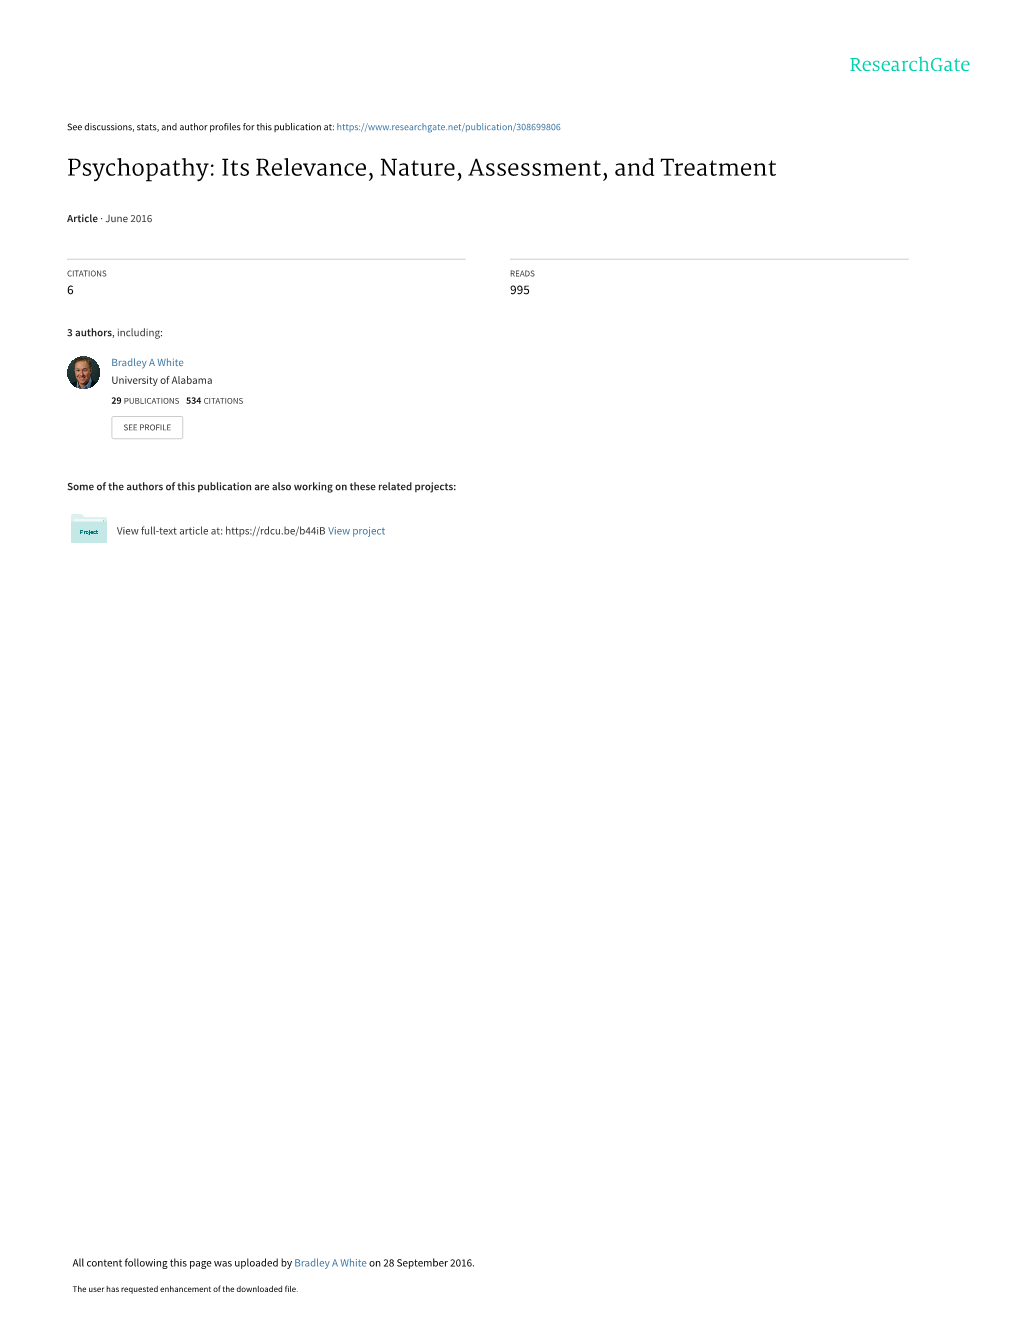 Psychopathy: Its Relevance, Nature, Assessment, and Treatment